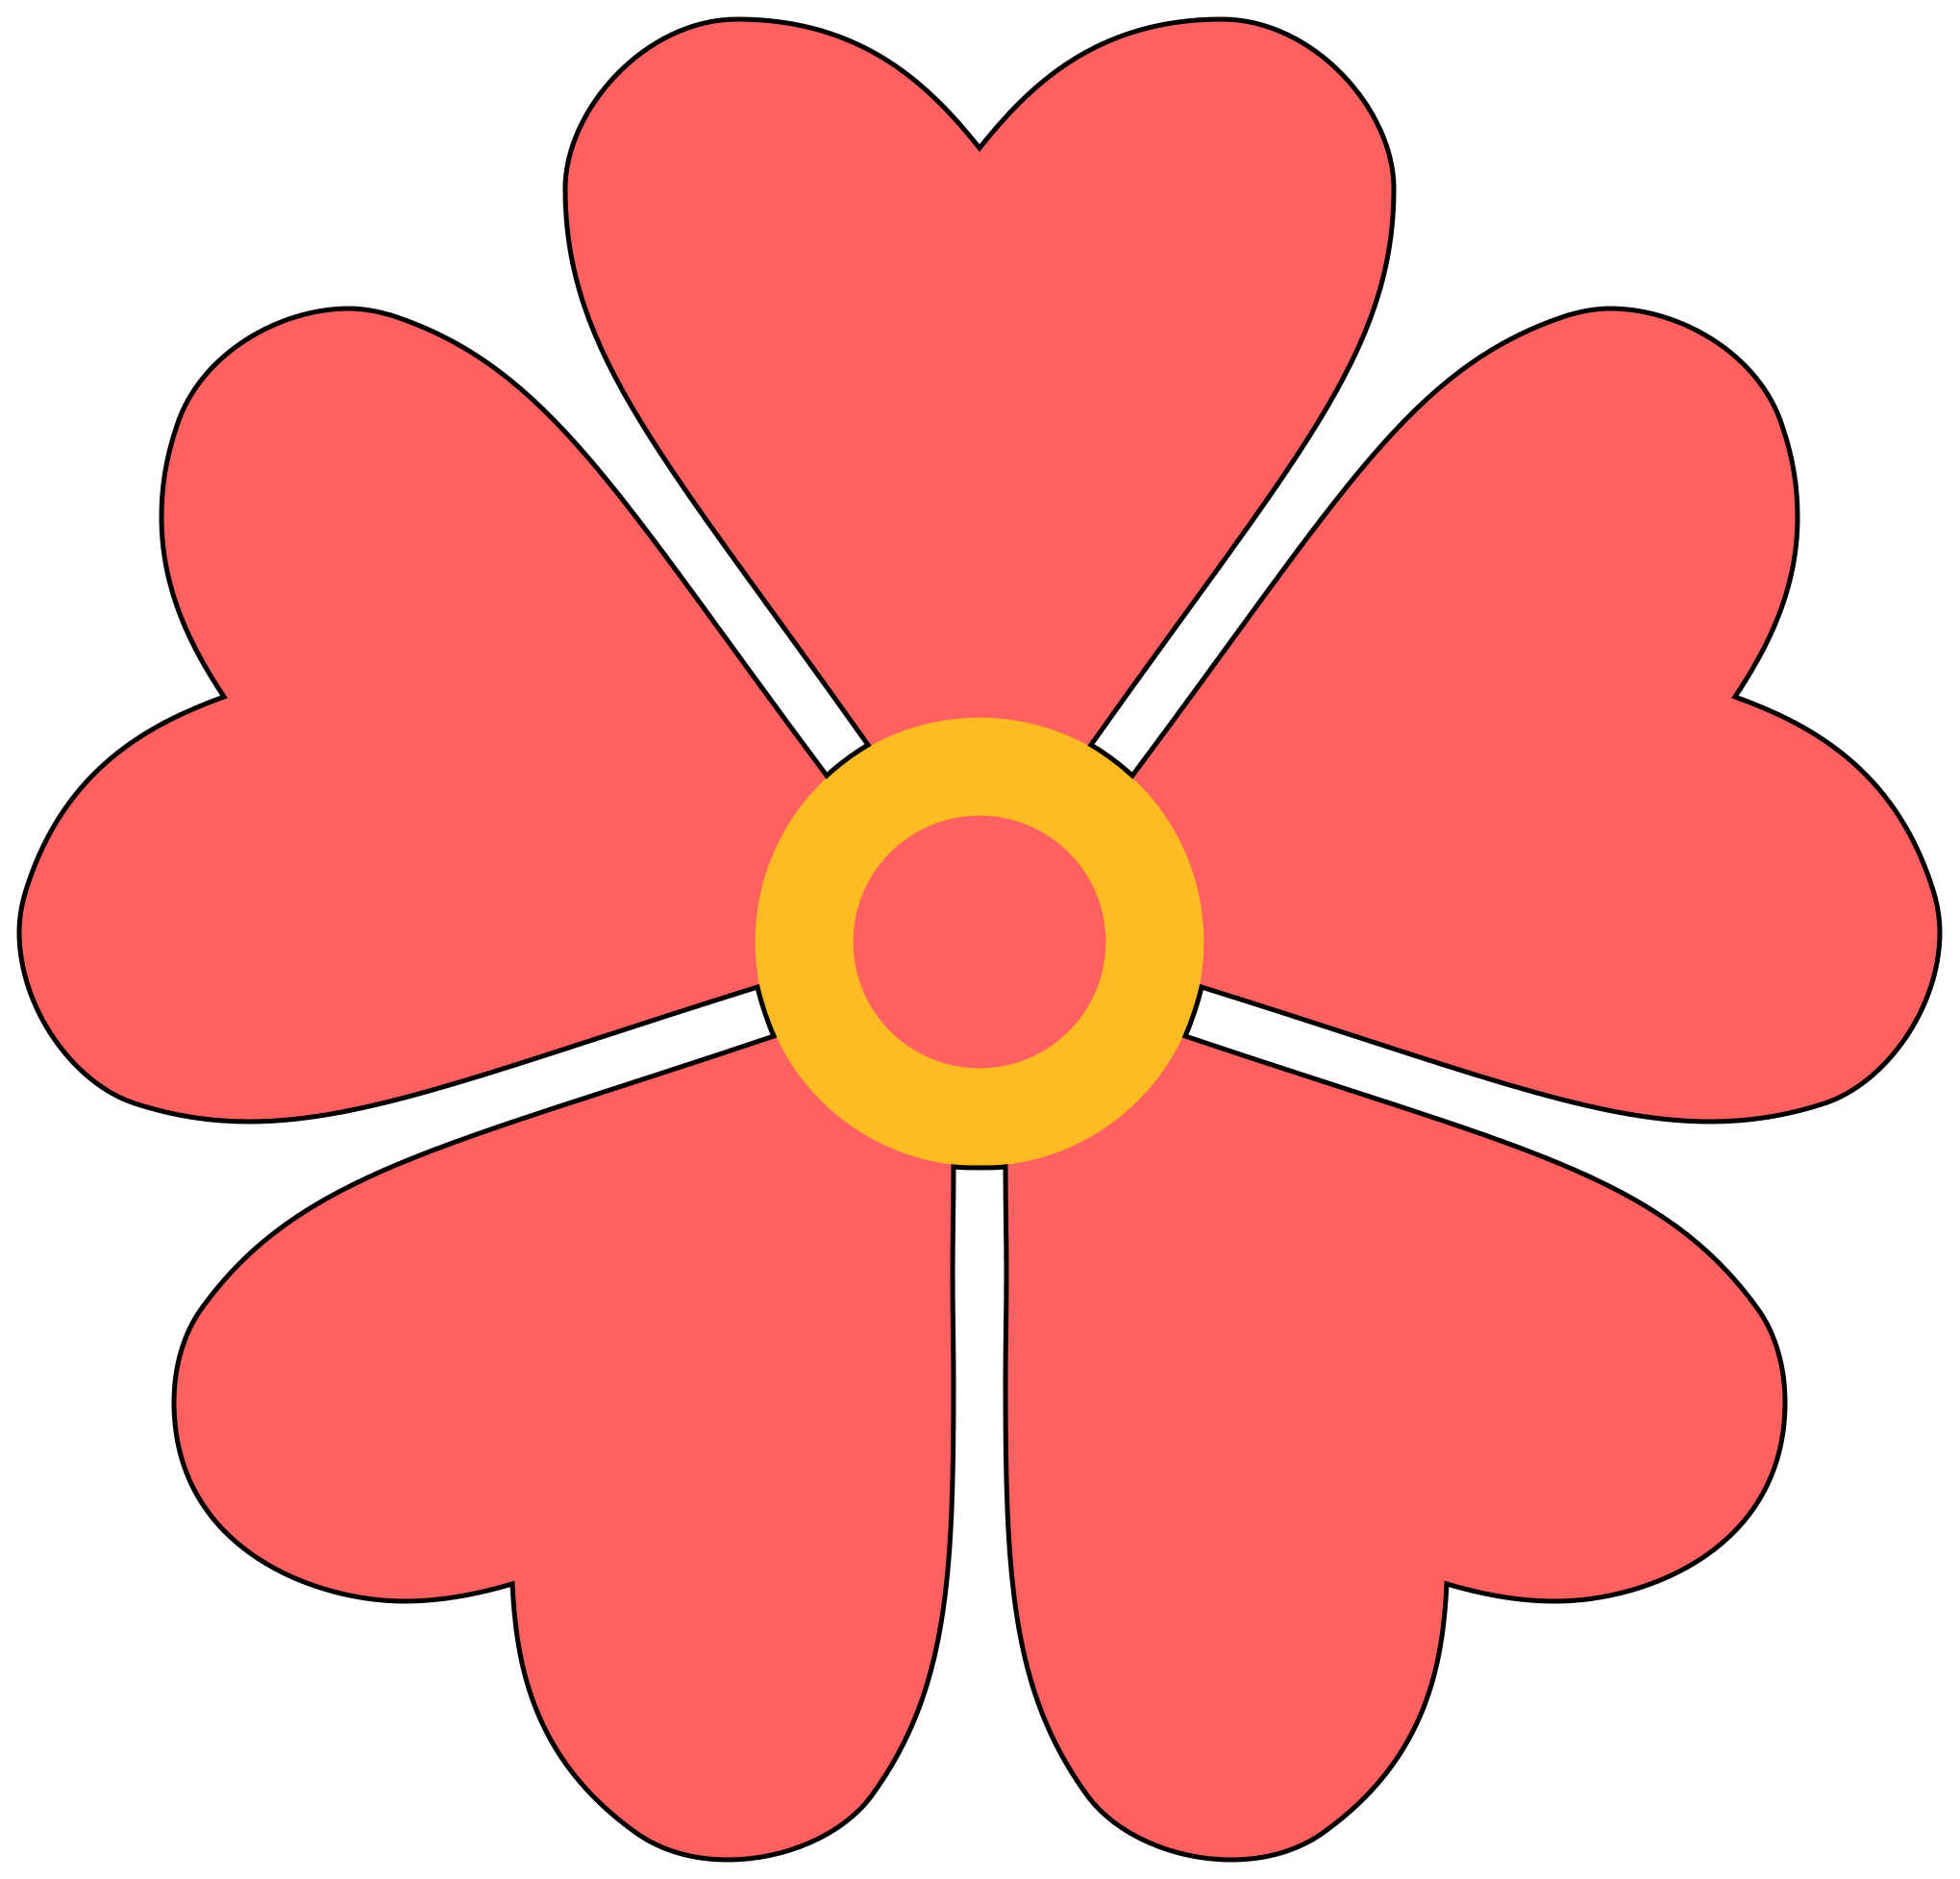 File:Flower with heart-shaped petals.svg - Wikipedia